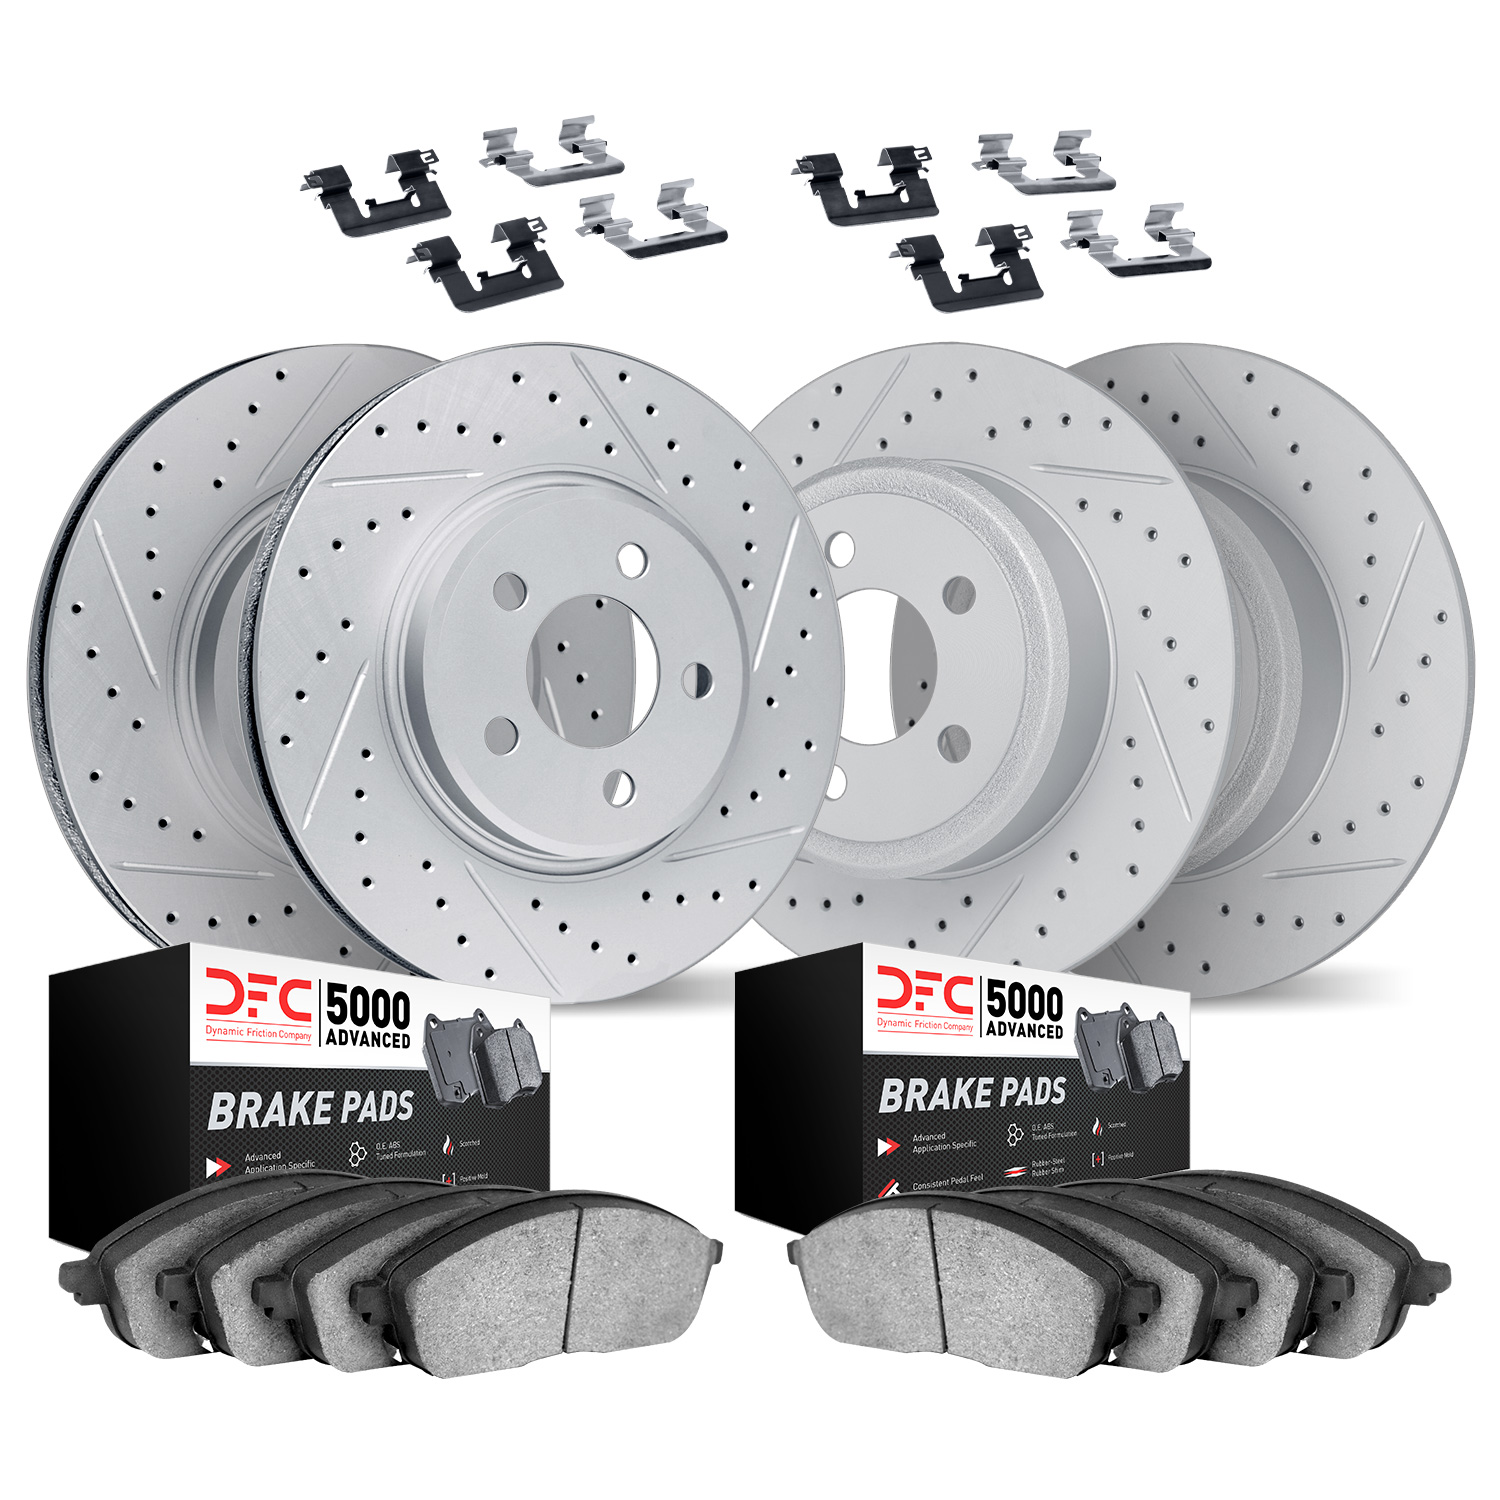 2514-59038 Geoperformance Drilled/Slotted Rotors w/5000 Advanced Brake Pads Kit & Hardware, 2002-2004 Acura/Honda, Position: Fro